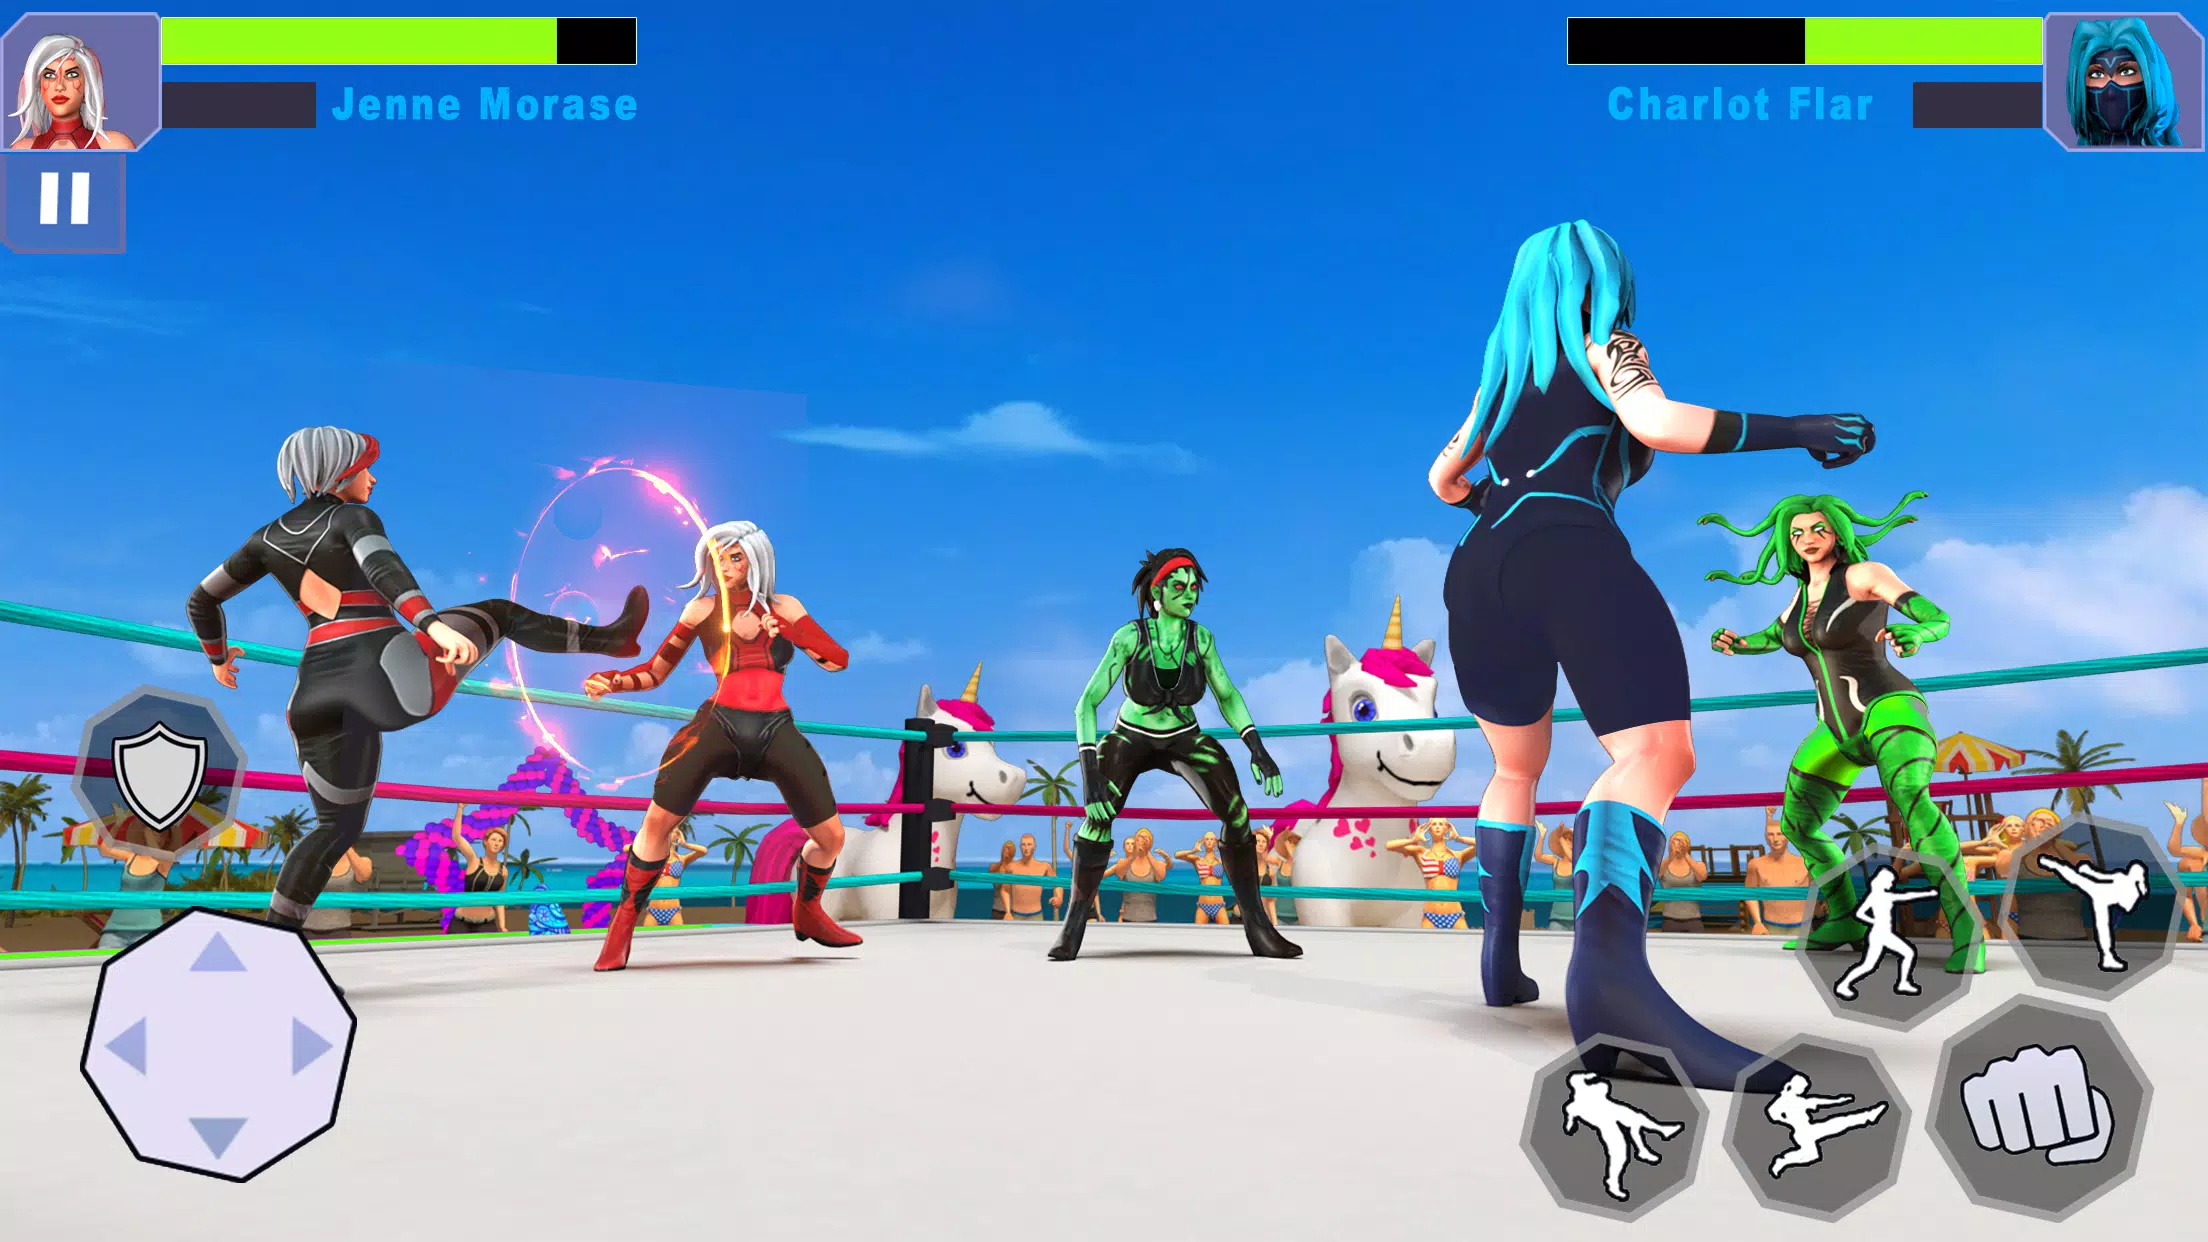 Girls wrestlers Crazy Games : Sports Live Game APK pour Android Télécharger